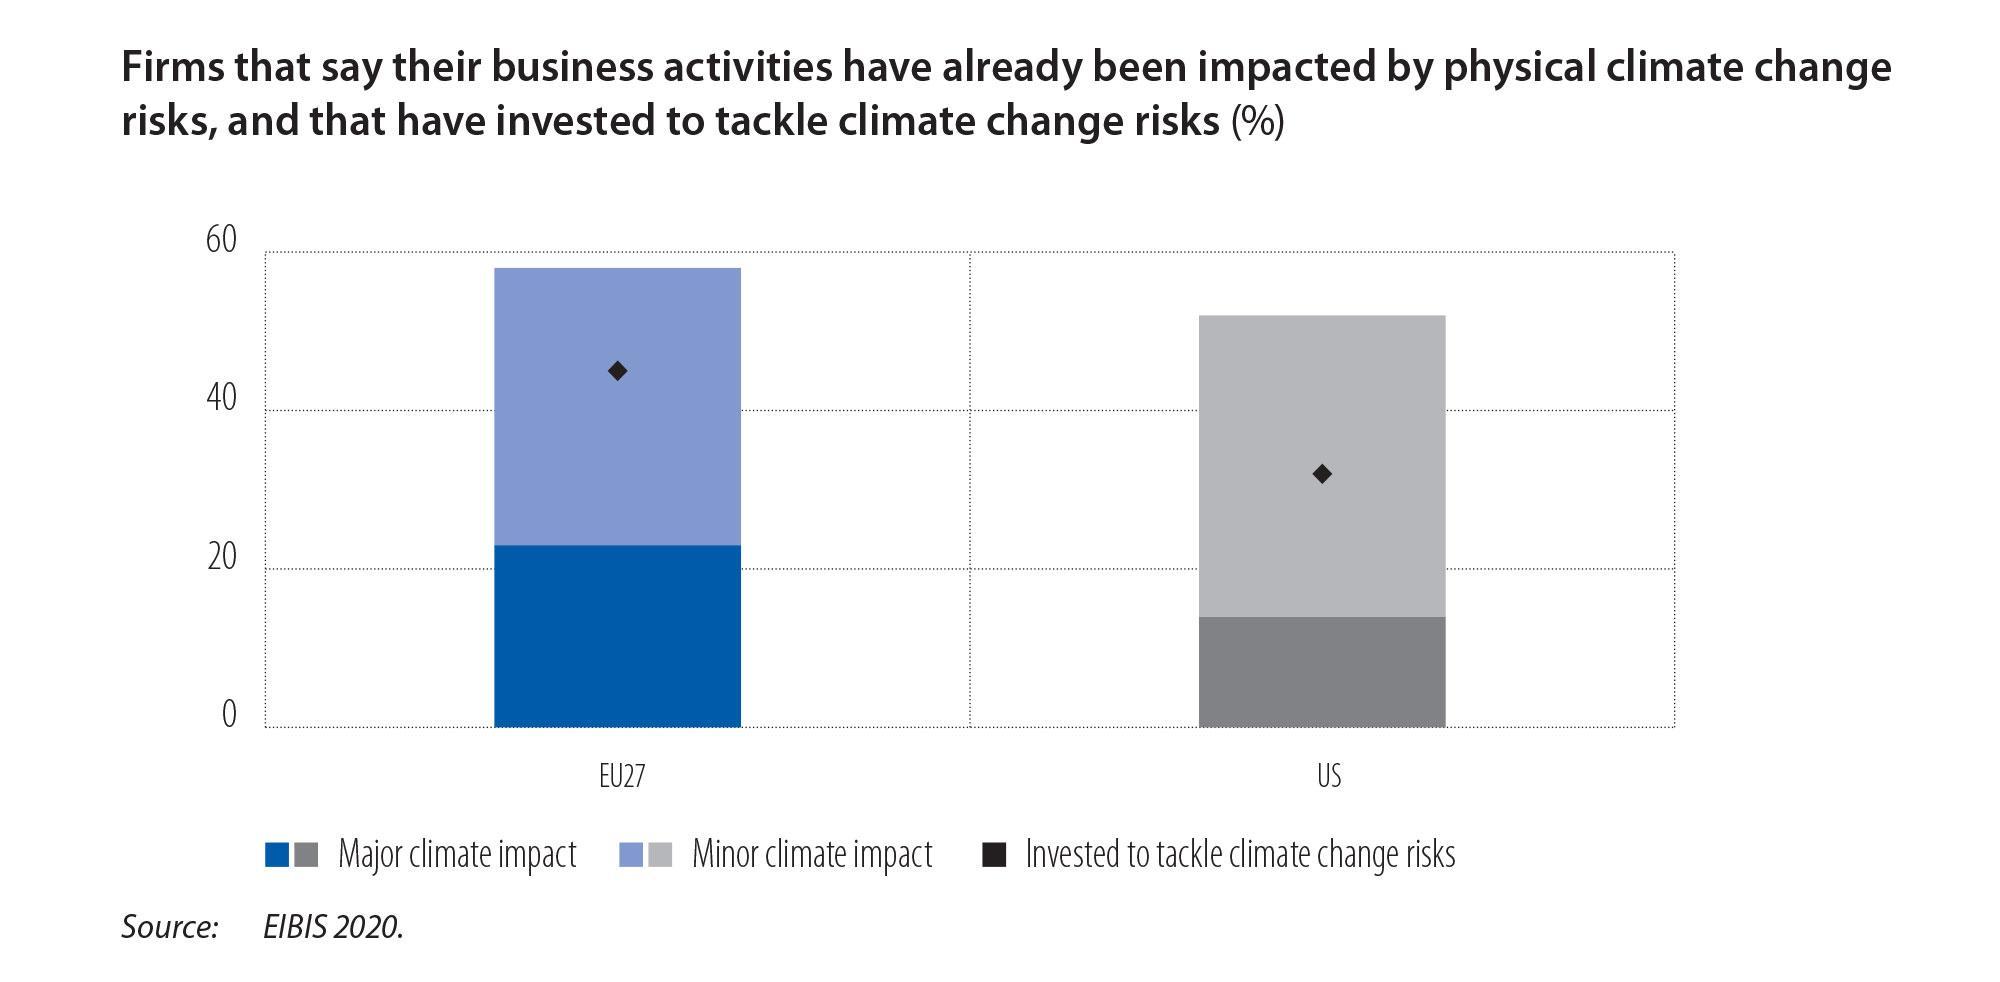 Firms that say their business activities have already been impacted by physical climate change risks, and have invested to tackle climate change risks (%)